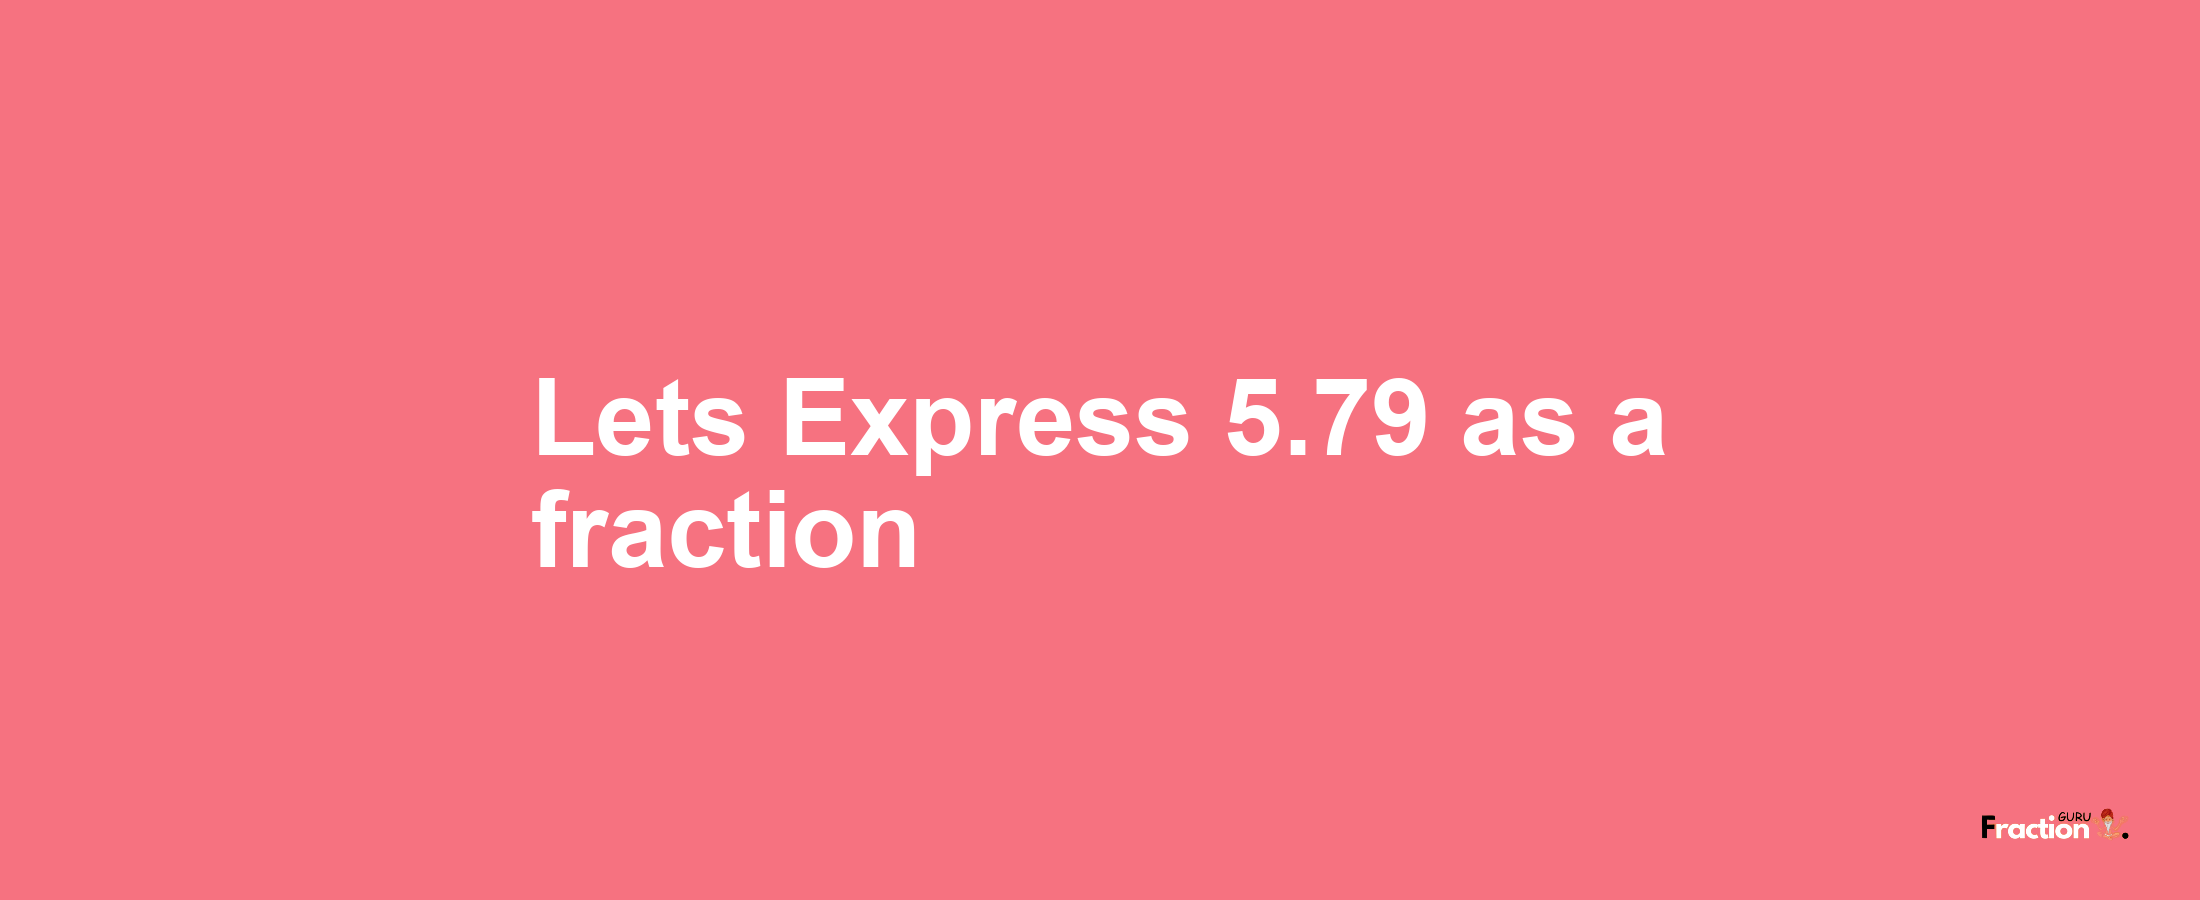 Lets Express 5.79 as afraction